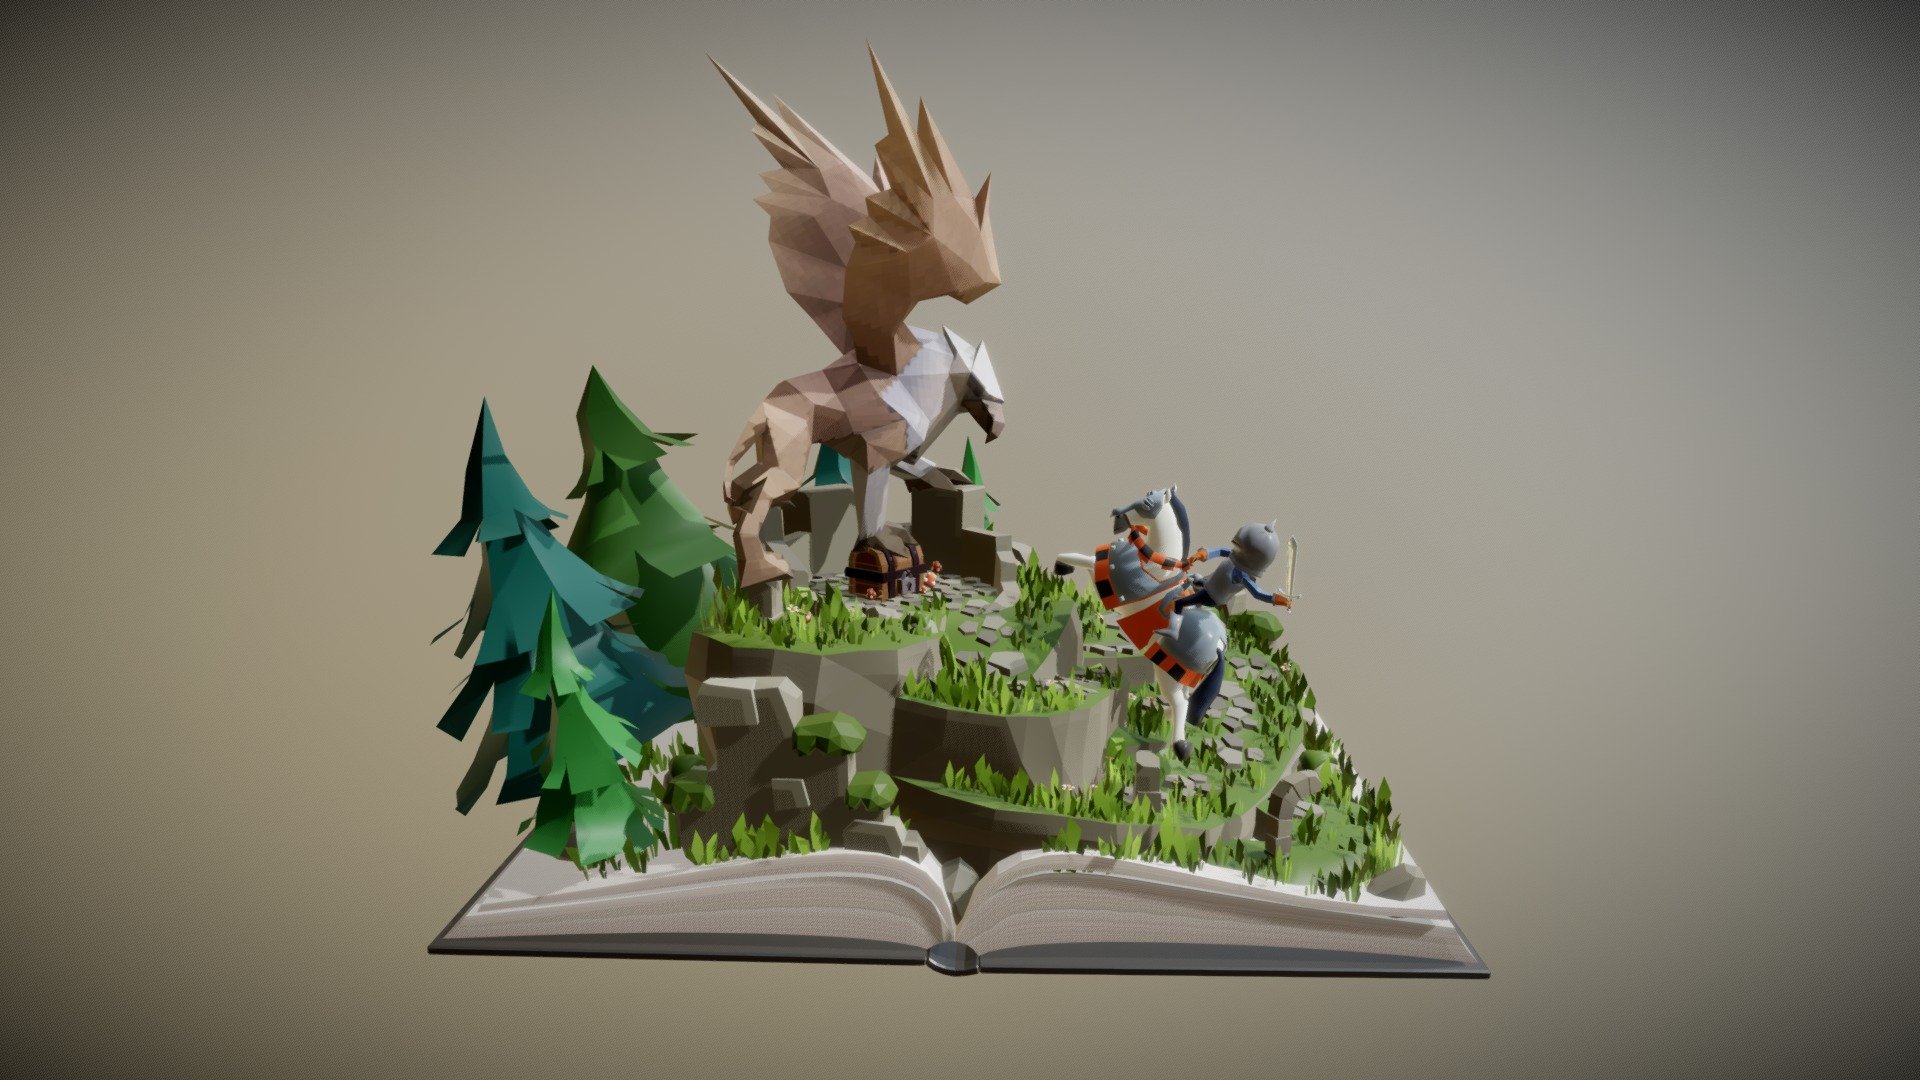 Hello, here's my entry for the Sketchfab Medieval Remix Challenge.
Here's a knight and a Griffin fighting over a treasure :D

I can't write all the names of the objects because it's too many.

Credits to:
roguenoodle - for the island, all rocks(including the mossy ones), all grass, all mushrooms, all path stones, all flowers, all fiddleheads, all trees, all castle ruins (which include the broken columns, the broken arc, and the broken walls), and the smaller island.

Pixel -  for the book

VitSh - for the Griffin

hamsterspit - for the armored 
horse and the knight

Juan Salazar - for the Sword

A few changes I made is that I rigged and posed the Griffin, the Knight, and the Horse because they are in T-pose/rest pose by default.


MedievalRemixChallenge - Legend - Download Free 3D model by Jesse Amiel D. Gayanilo (@JCG_THE_GREAT) 3d model